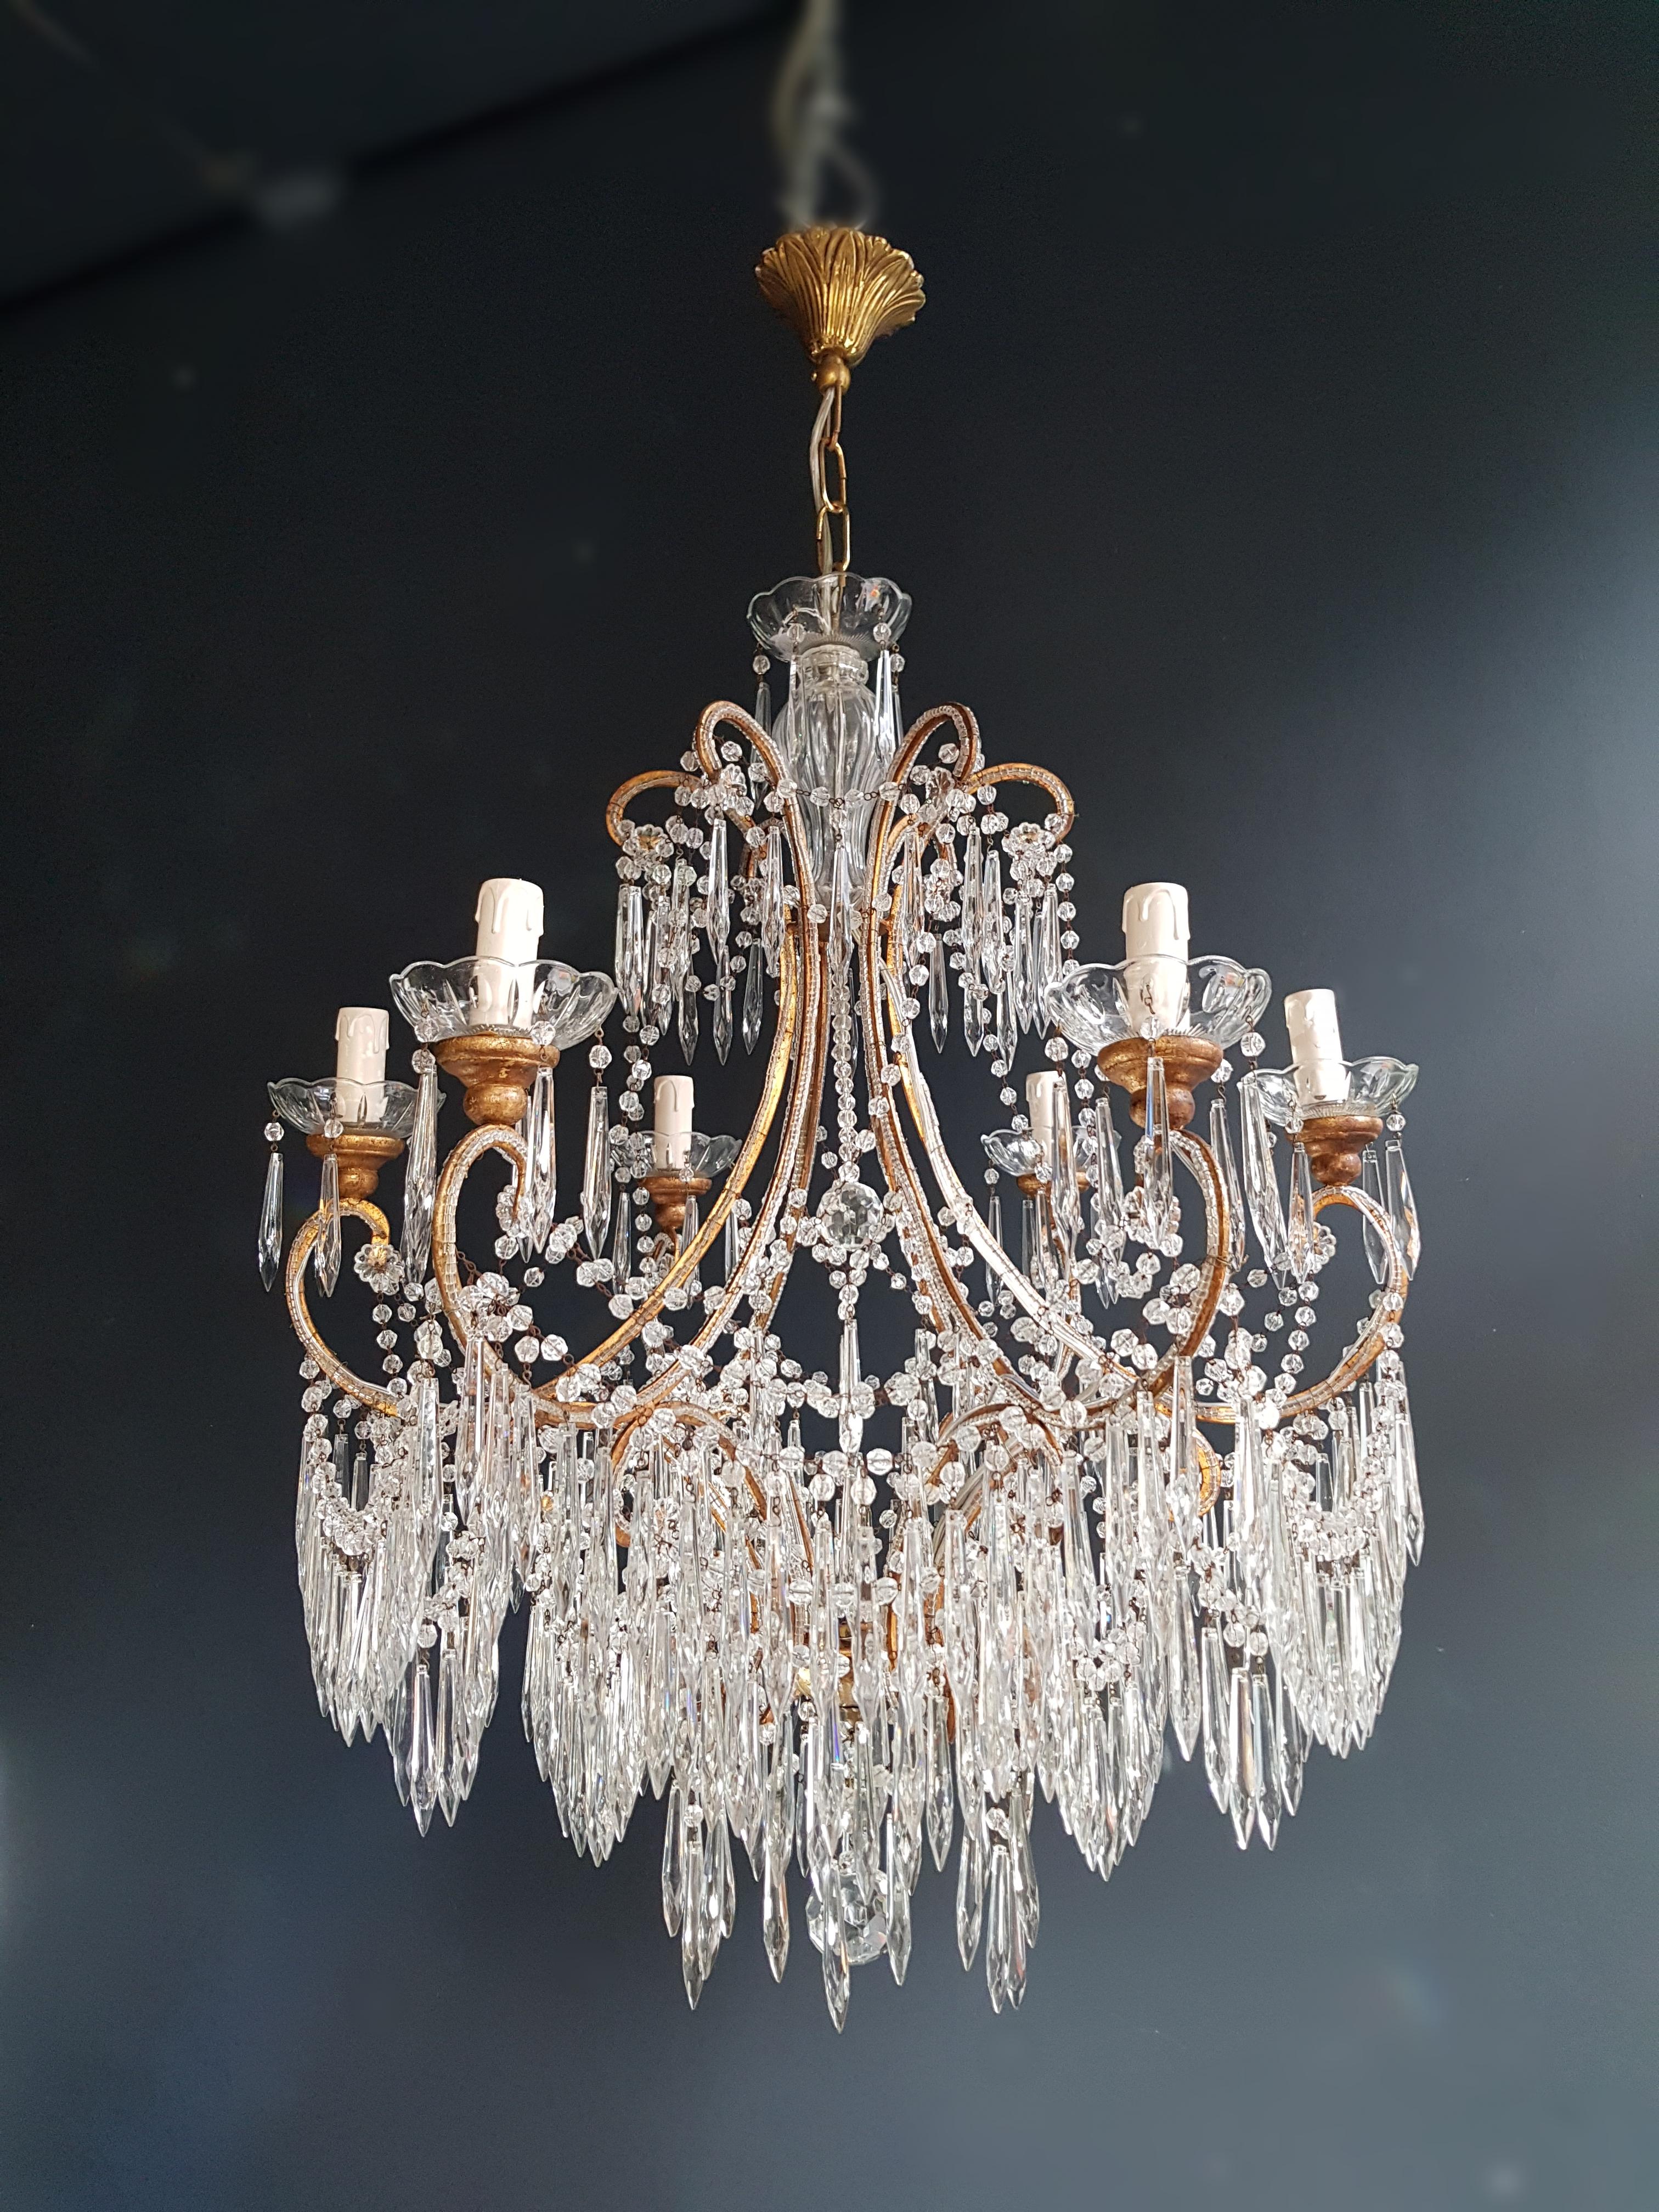 Beaded Florentine chandelier antique ceiling lamp lustre Art Nouveau.
The brass frame is surrounded all-over by beaded chains where pear drop cut crystals drops of different dimensions are hanging. Cut glass cups stand on the arms of the chandelier